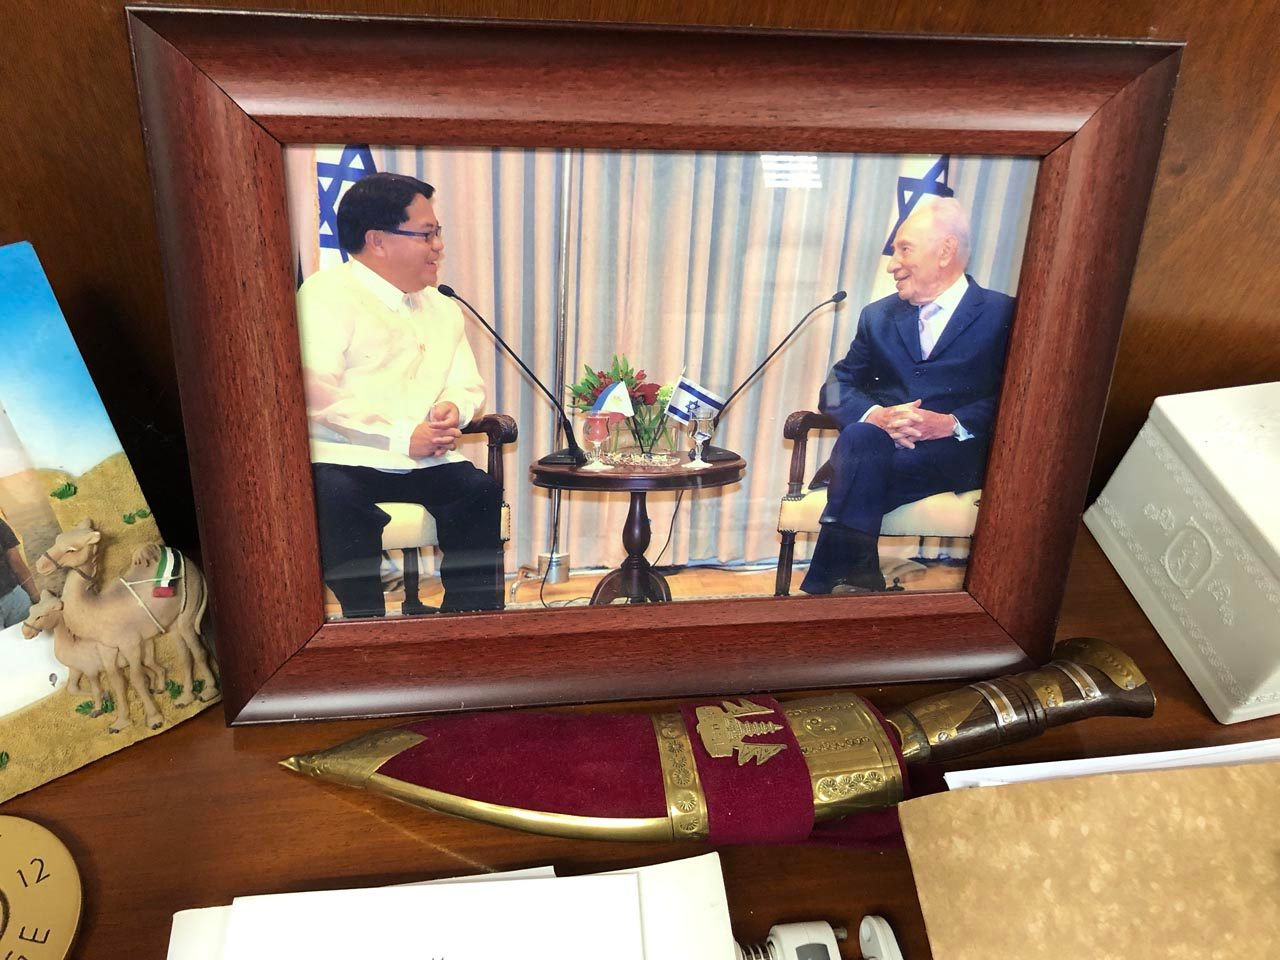 TIME IN ISRAEL. Calonge keeps a framed photo of his meeting with former president of Israel Shimon Peres in his office. Photo by Sofia Tomacruz/Rappler 